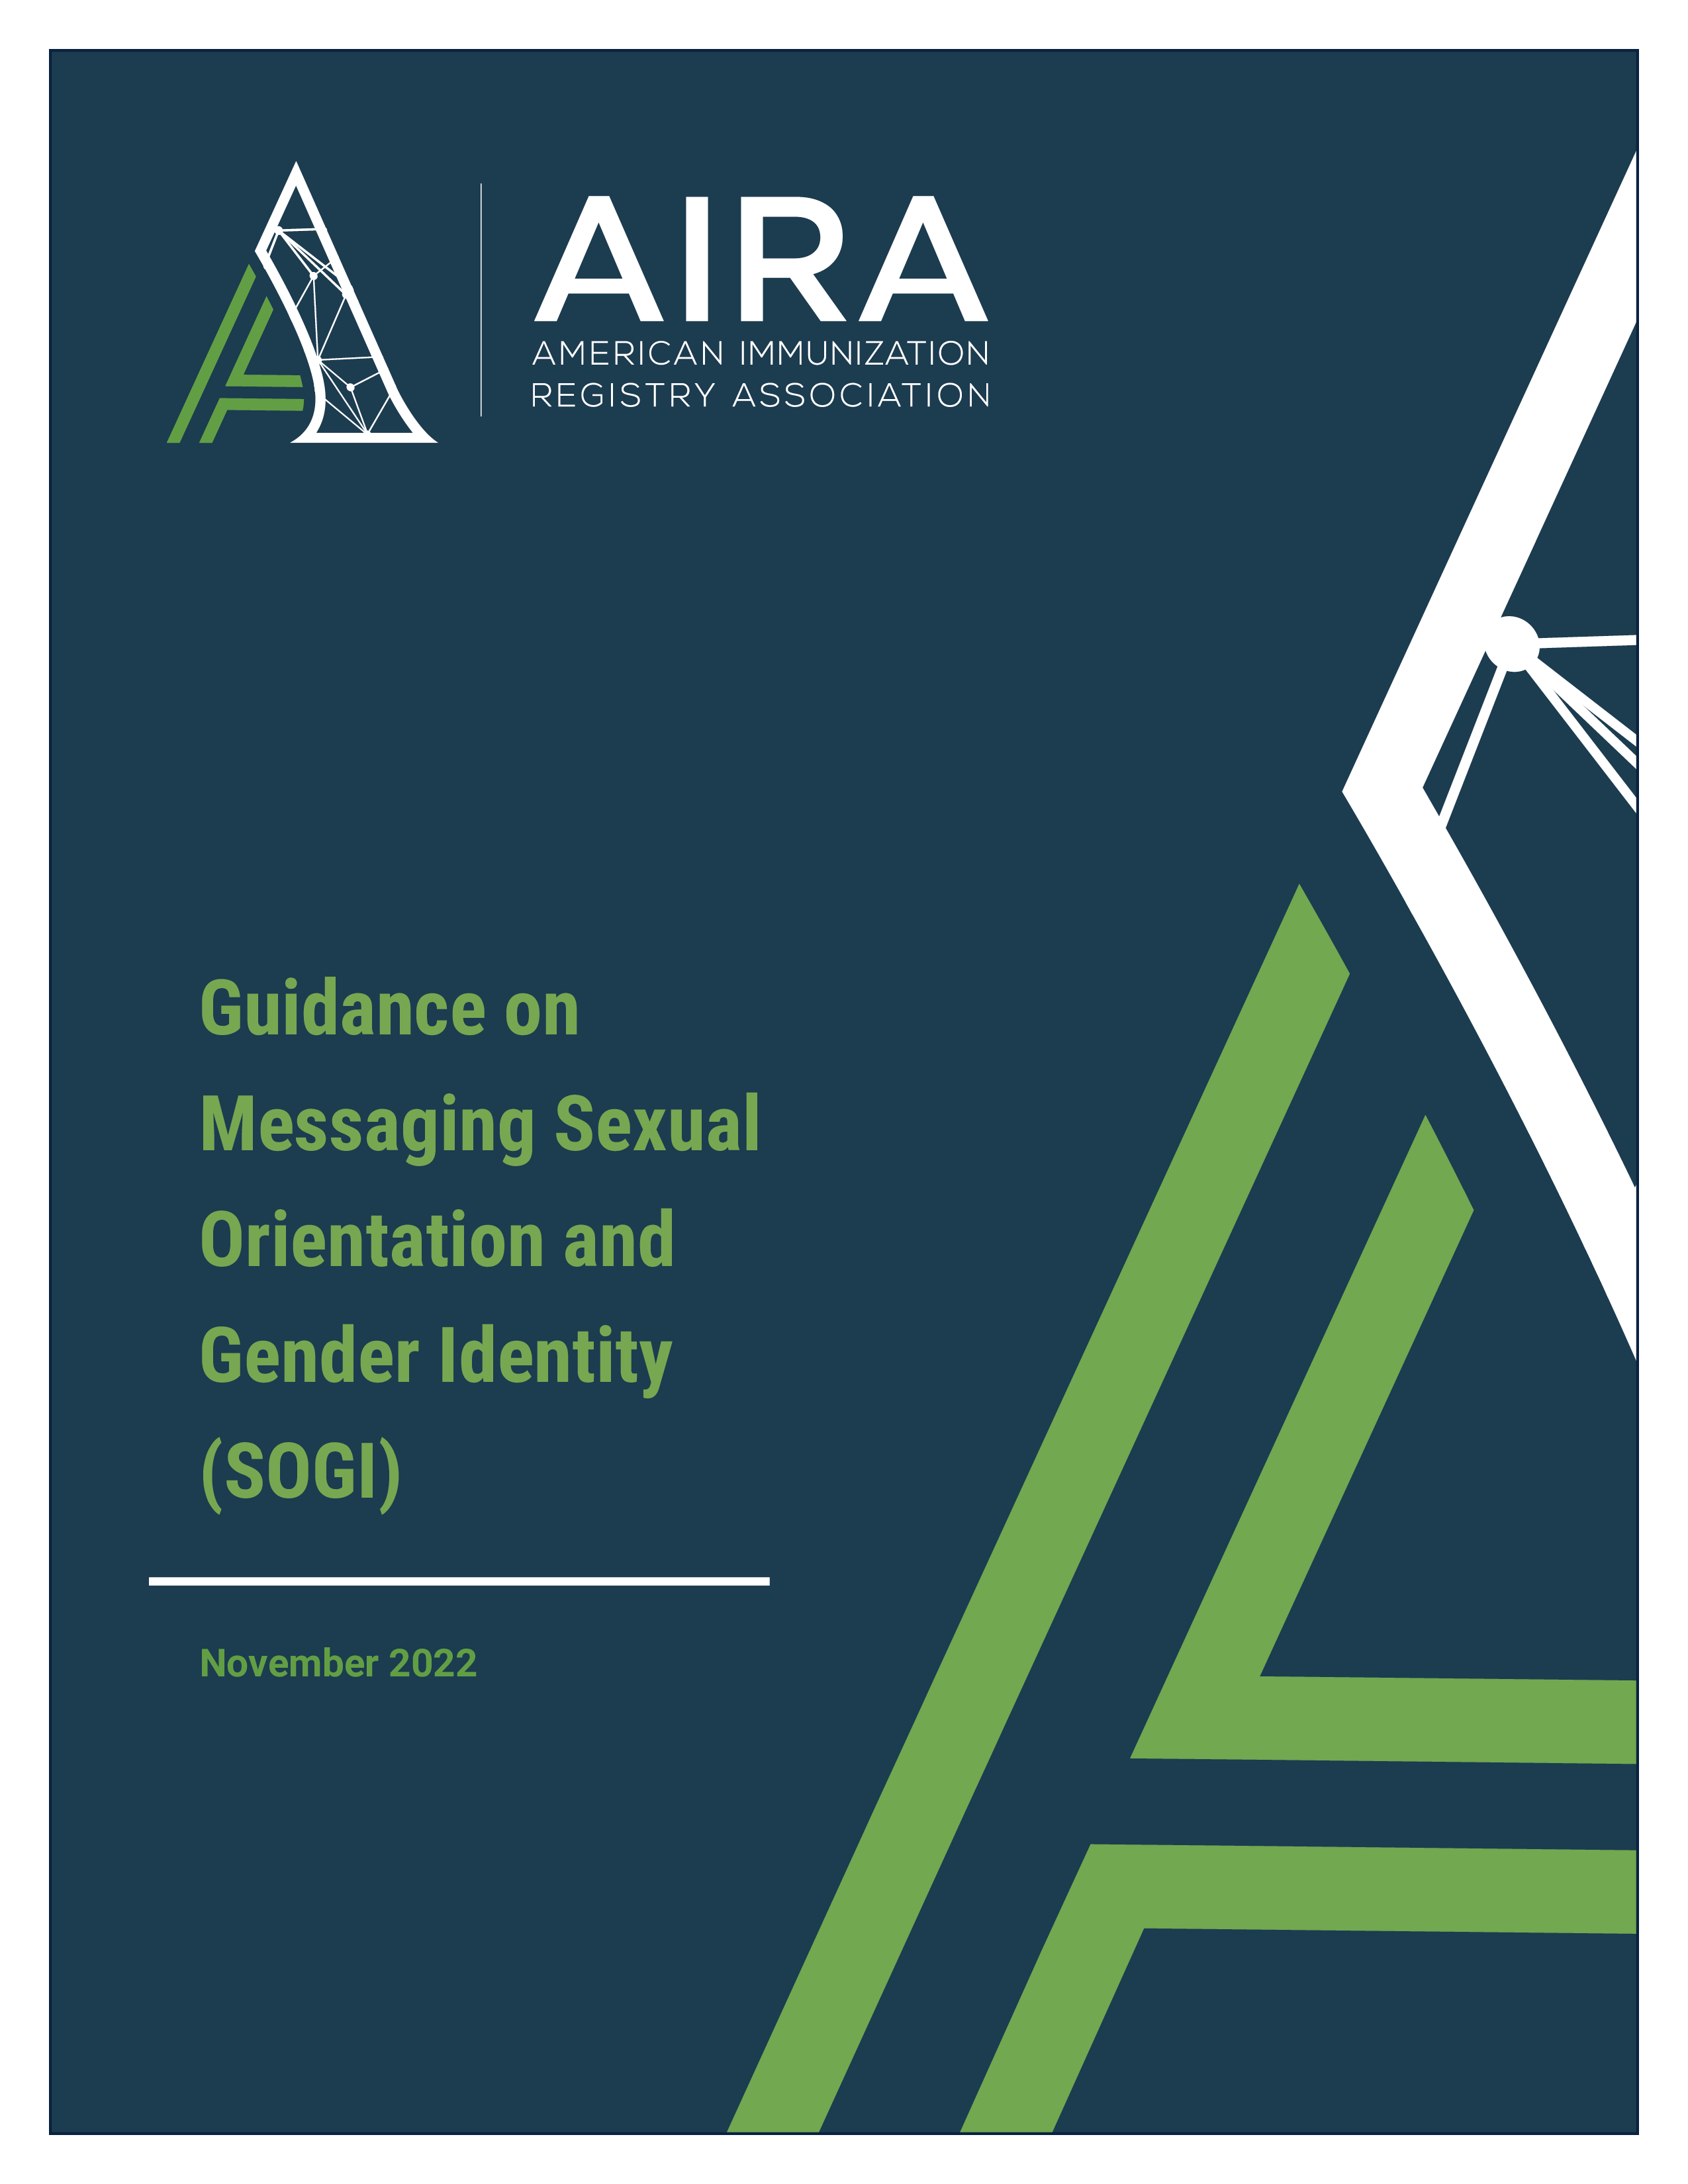 Report cover with AIRA logo and blue, green, and white color scheme.